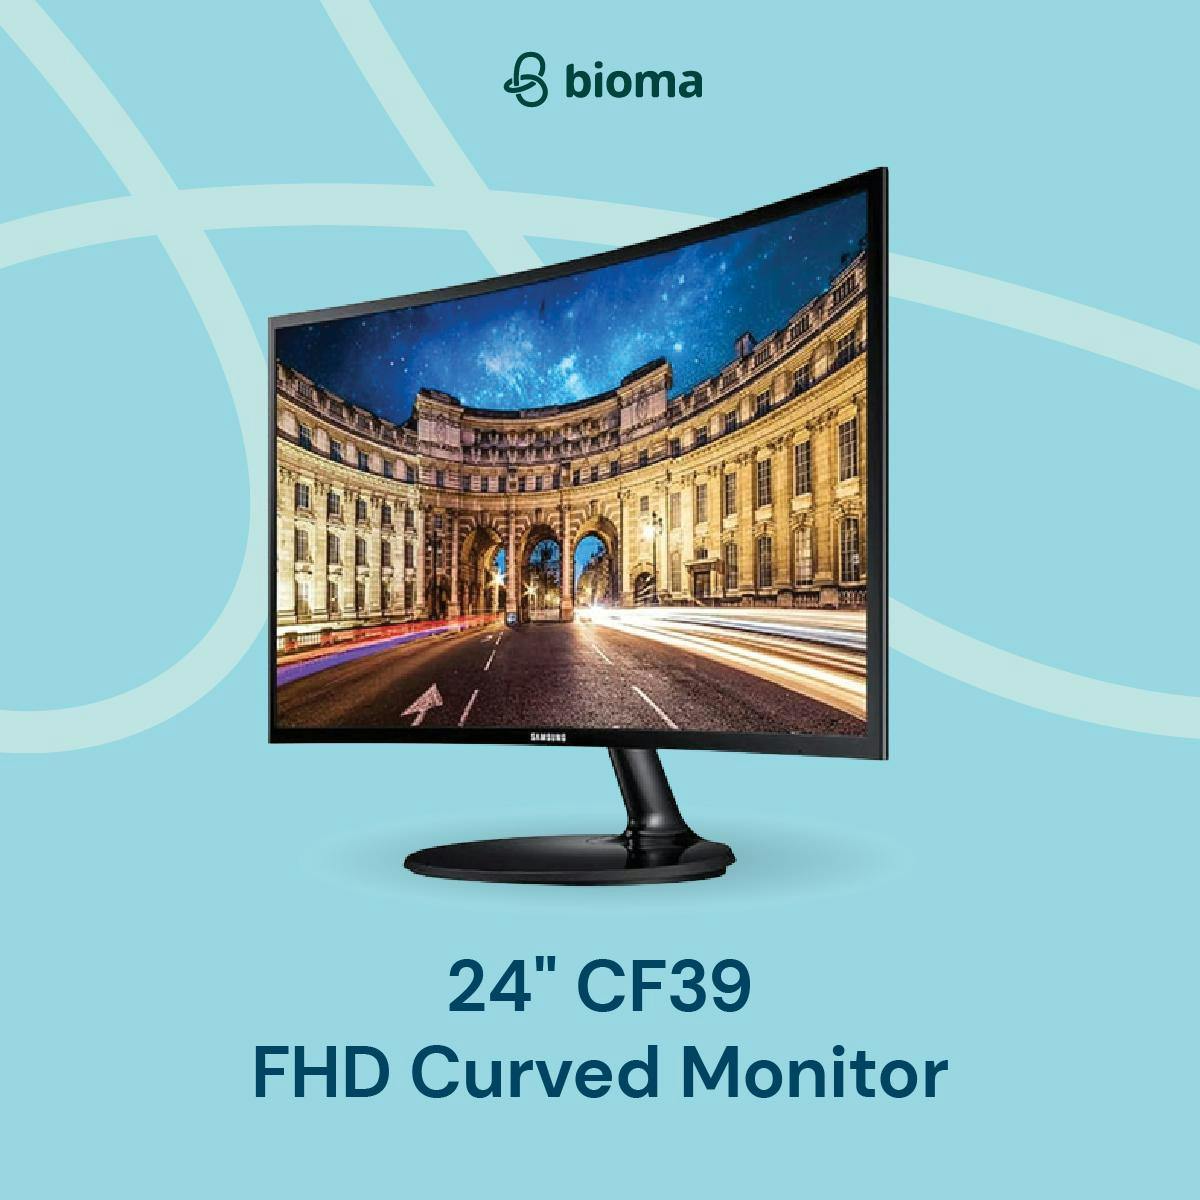 24" CF39 FHD Curved Monitor